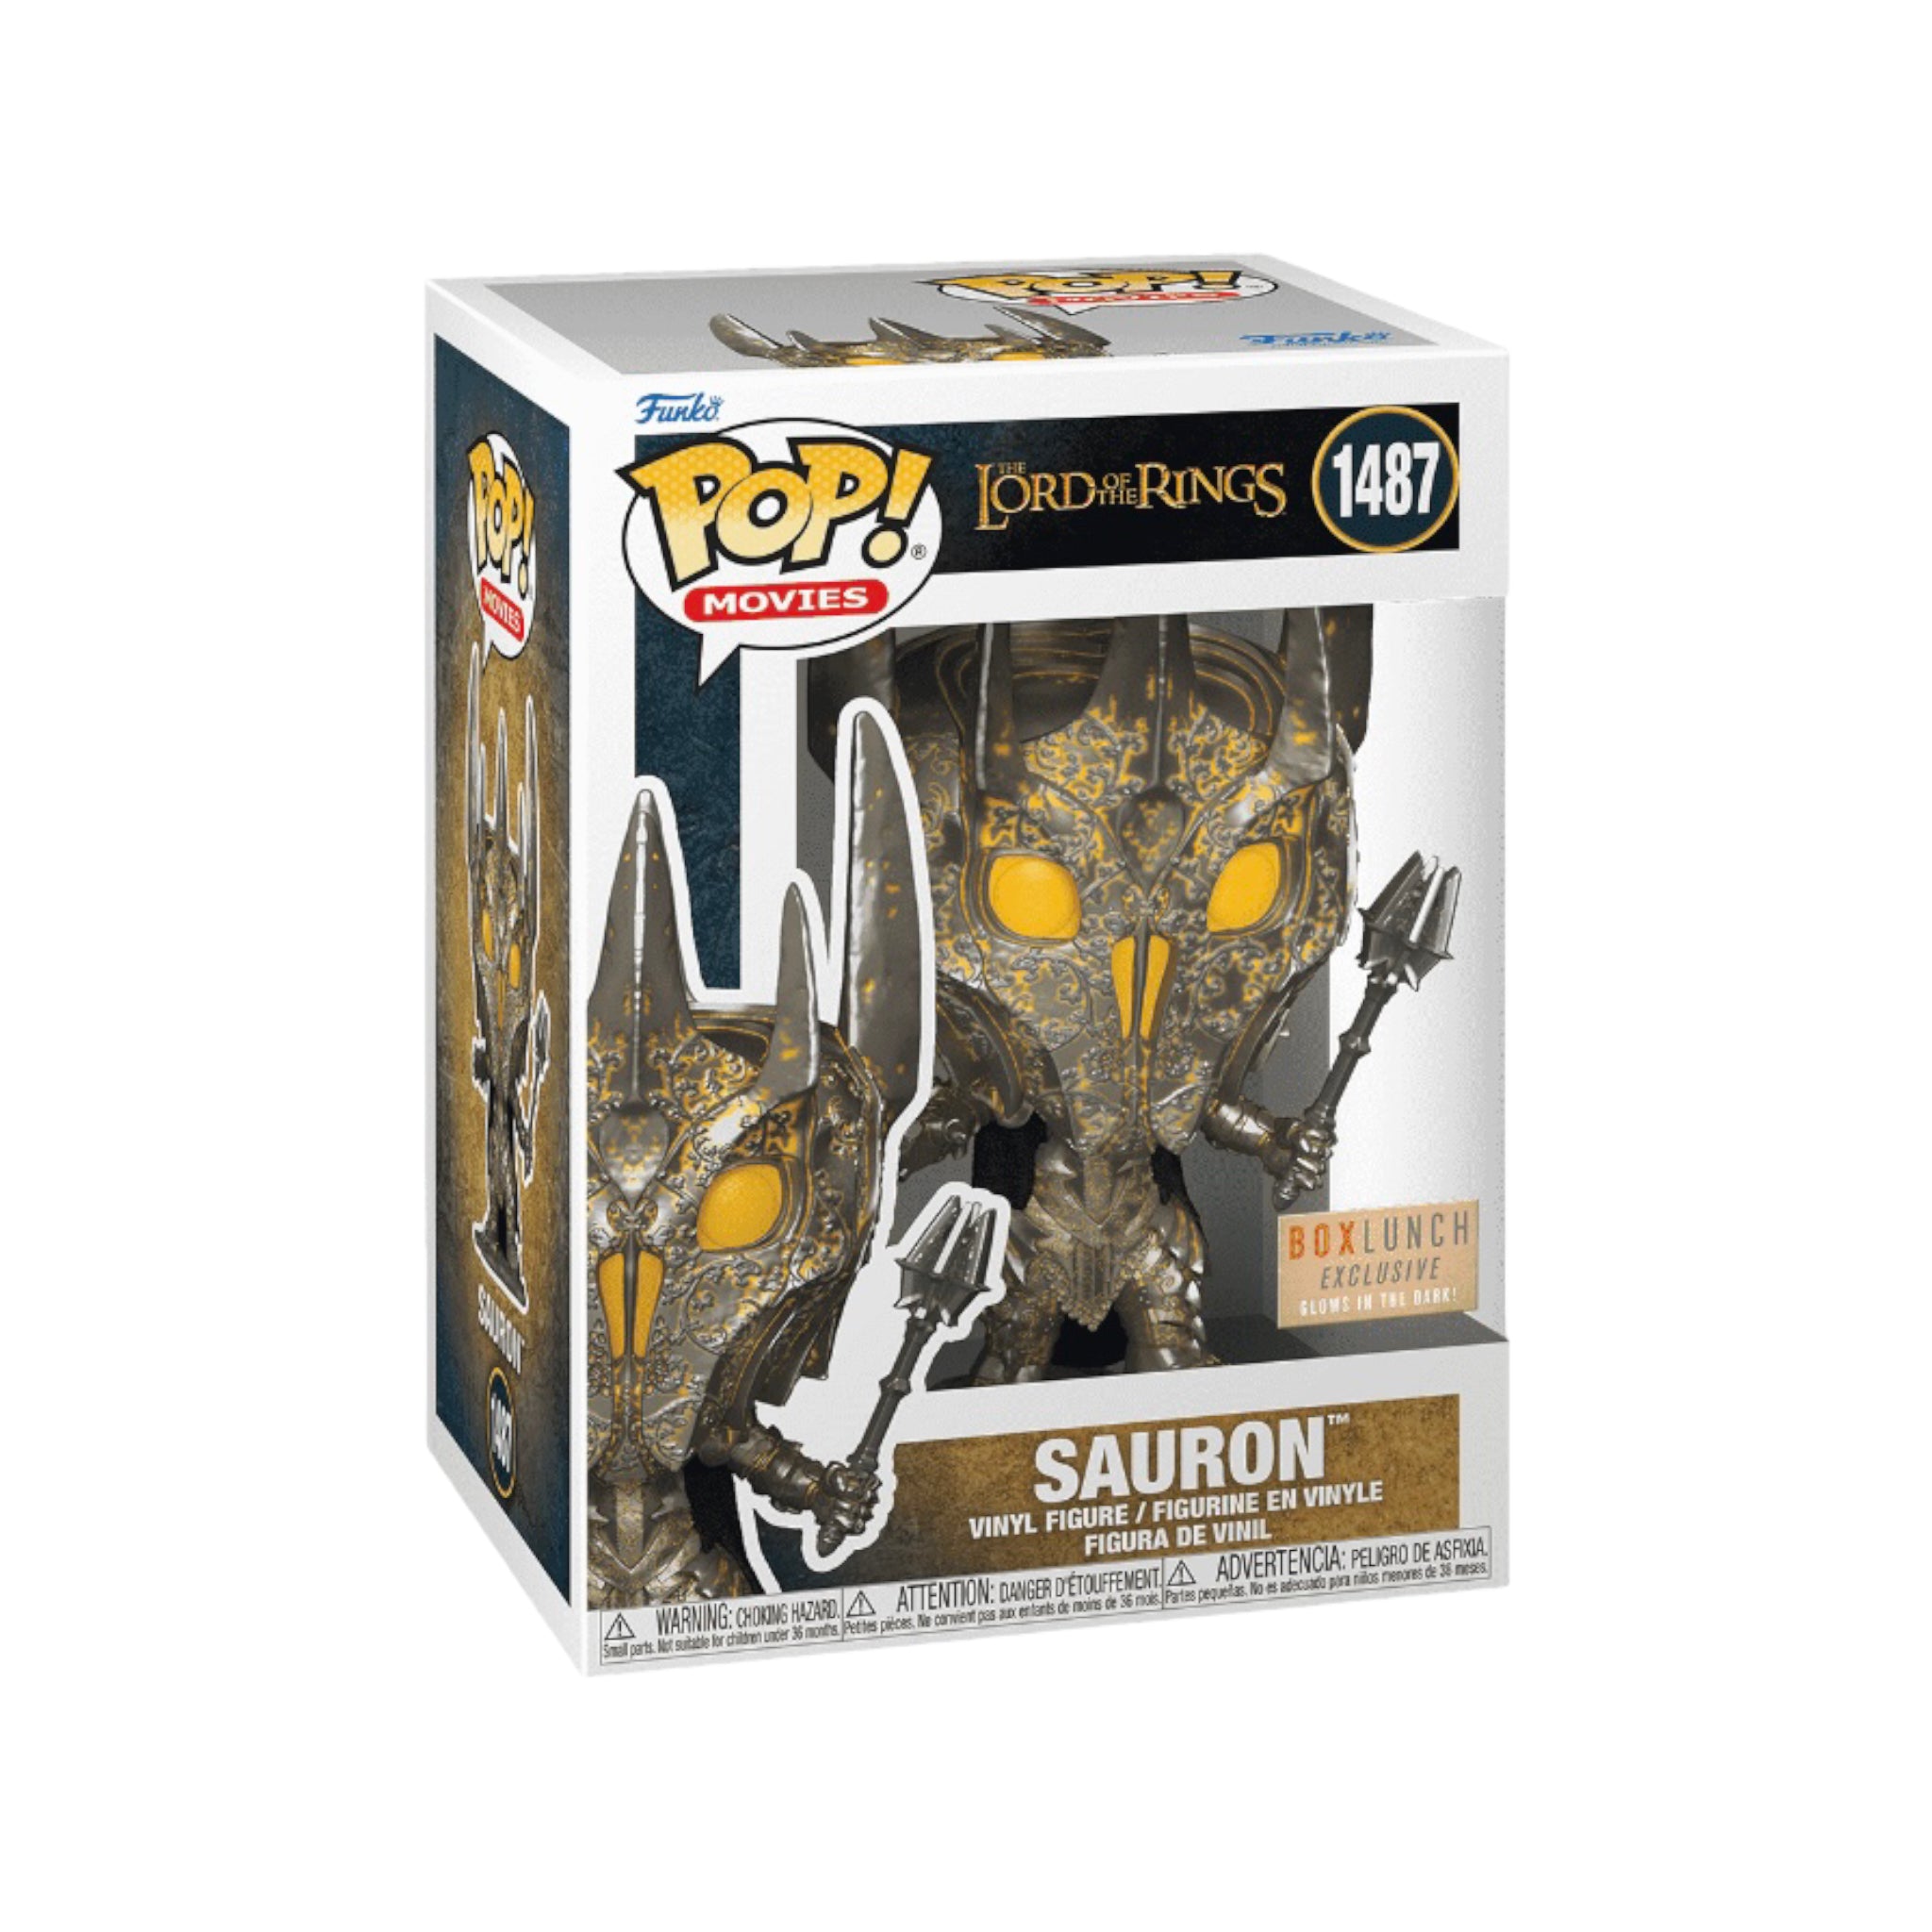 Sauron #1487 (Glows in the Dark) Funko Pop! - The Lord of The Rings - BoxLunch Exclusive